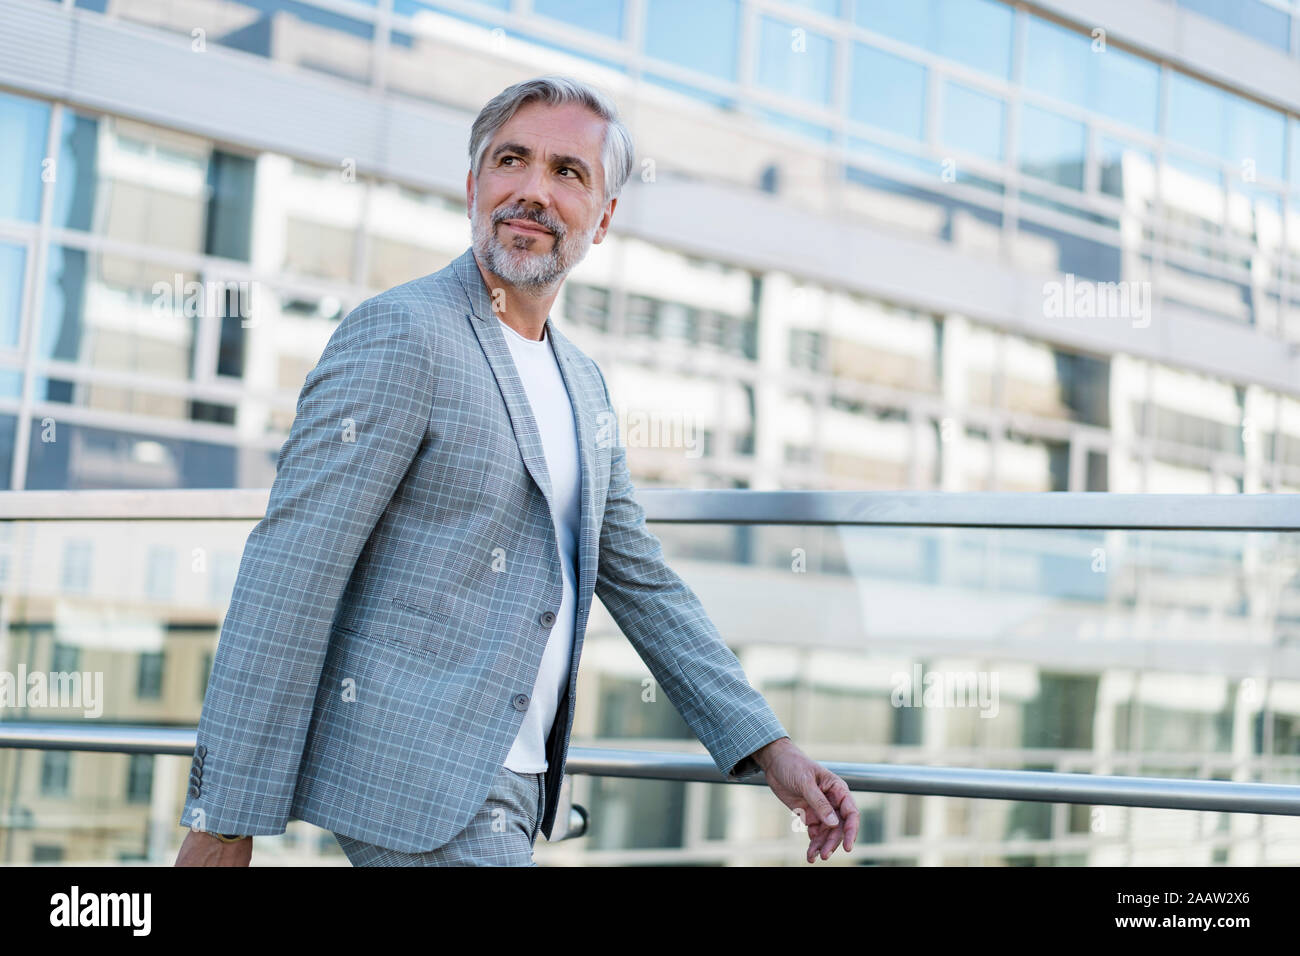 Confident mature businessman on the go looking around Stock Photo - Alamy